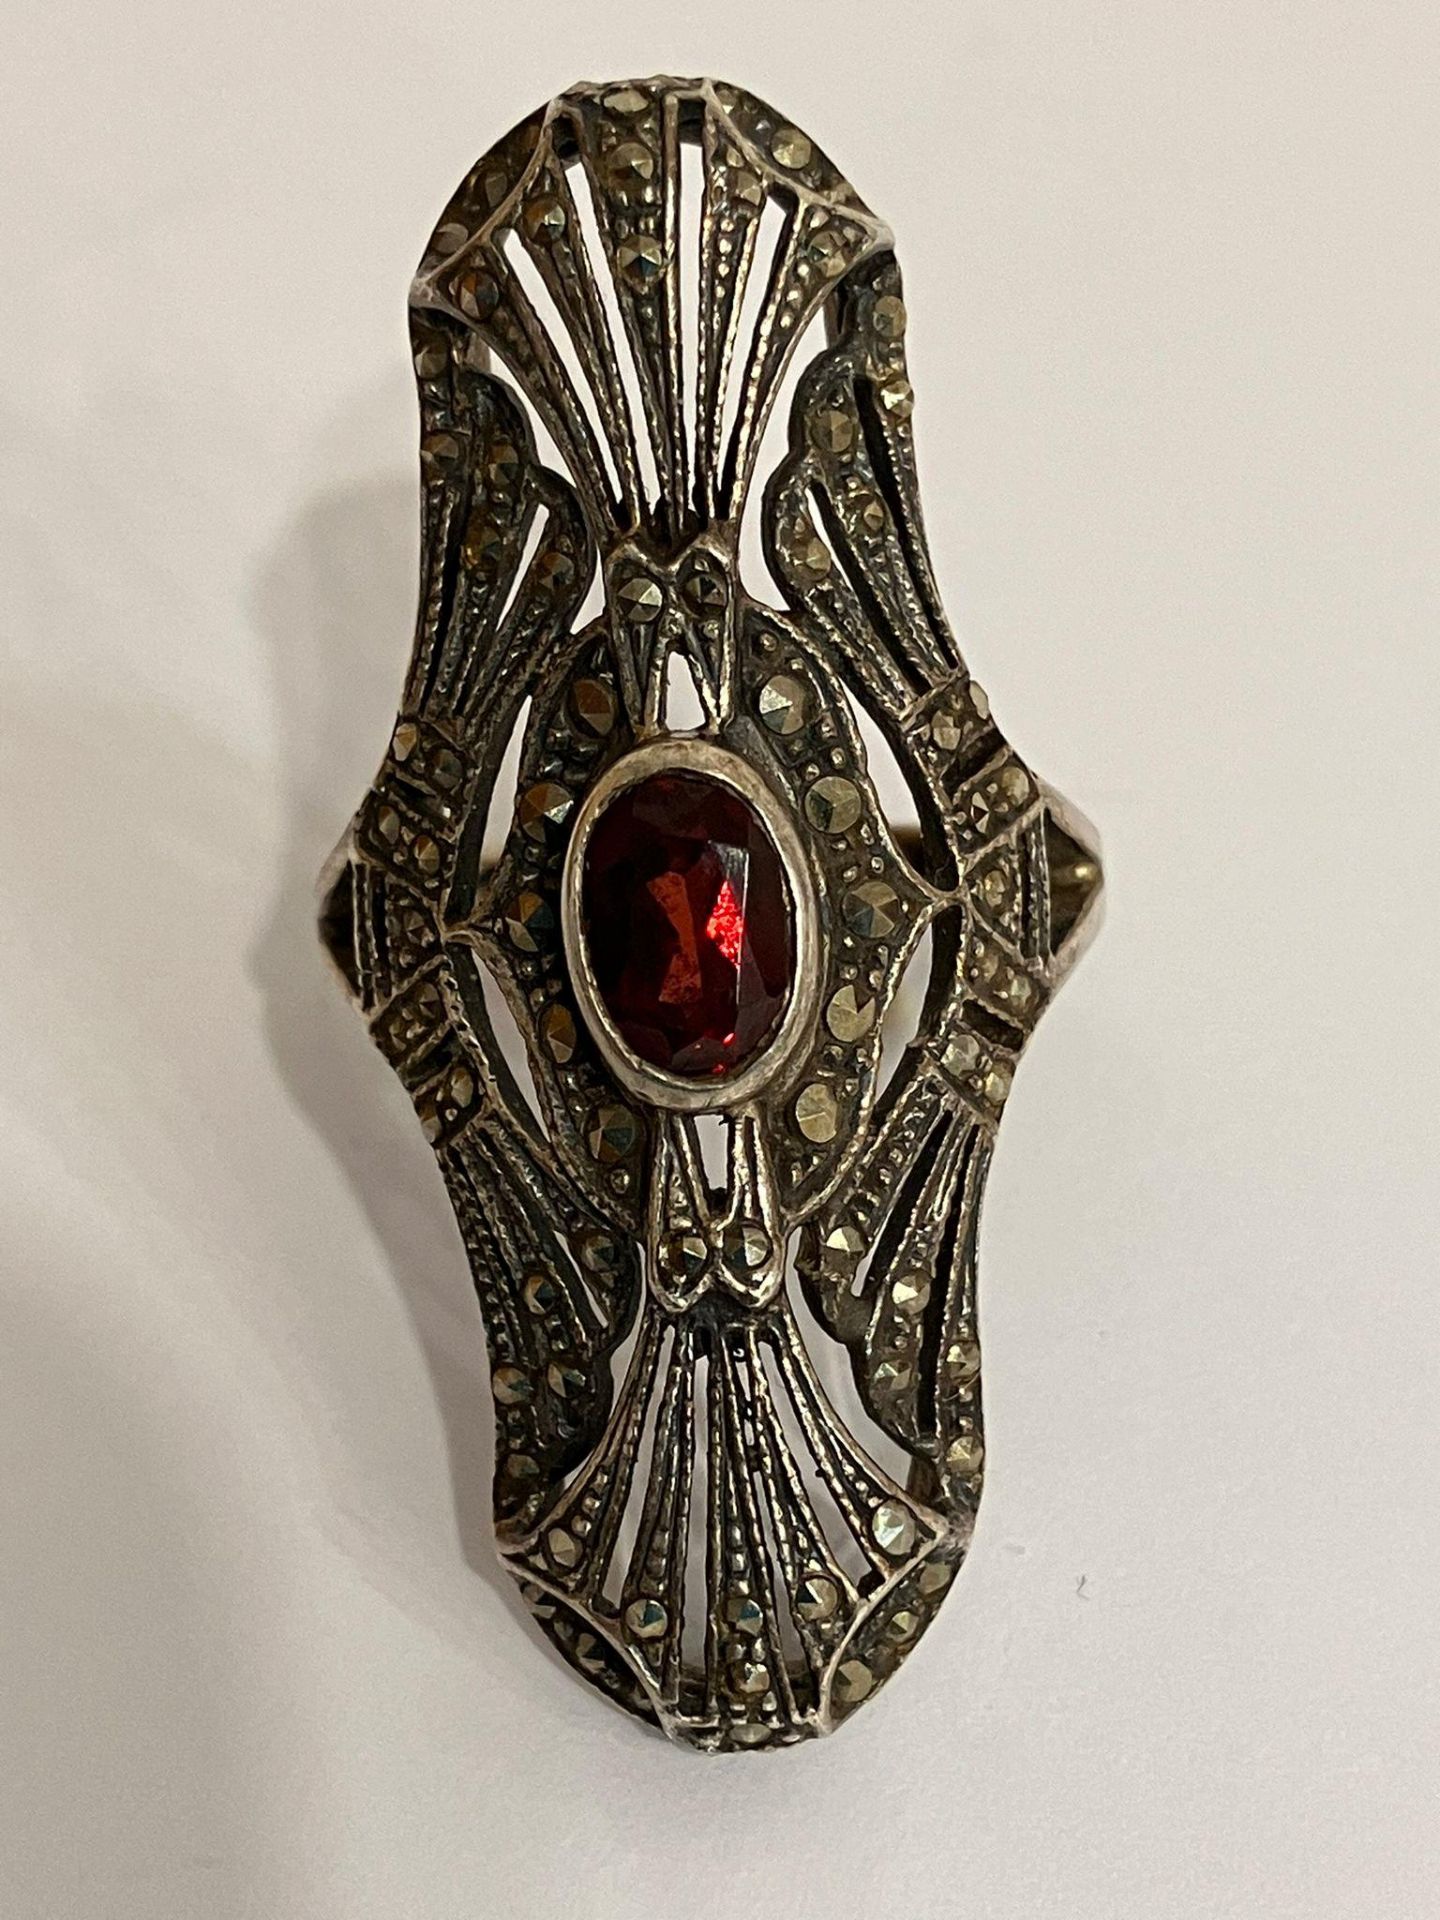 Fabulous vintage SILVER MARCASITE RING in ART DECO STYLE with beautiful Oval Cut GARNET to centre. - Image 5 of 5